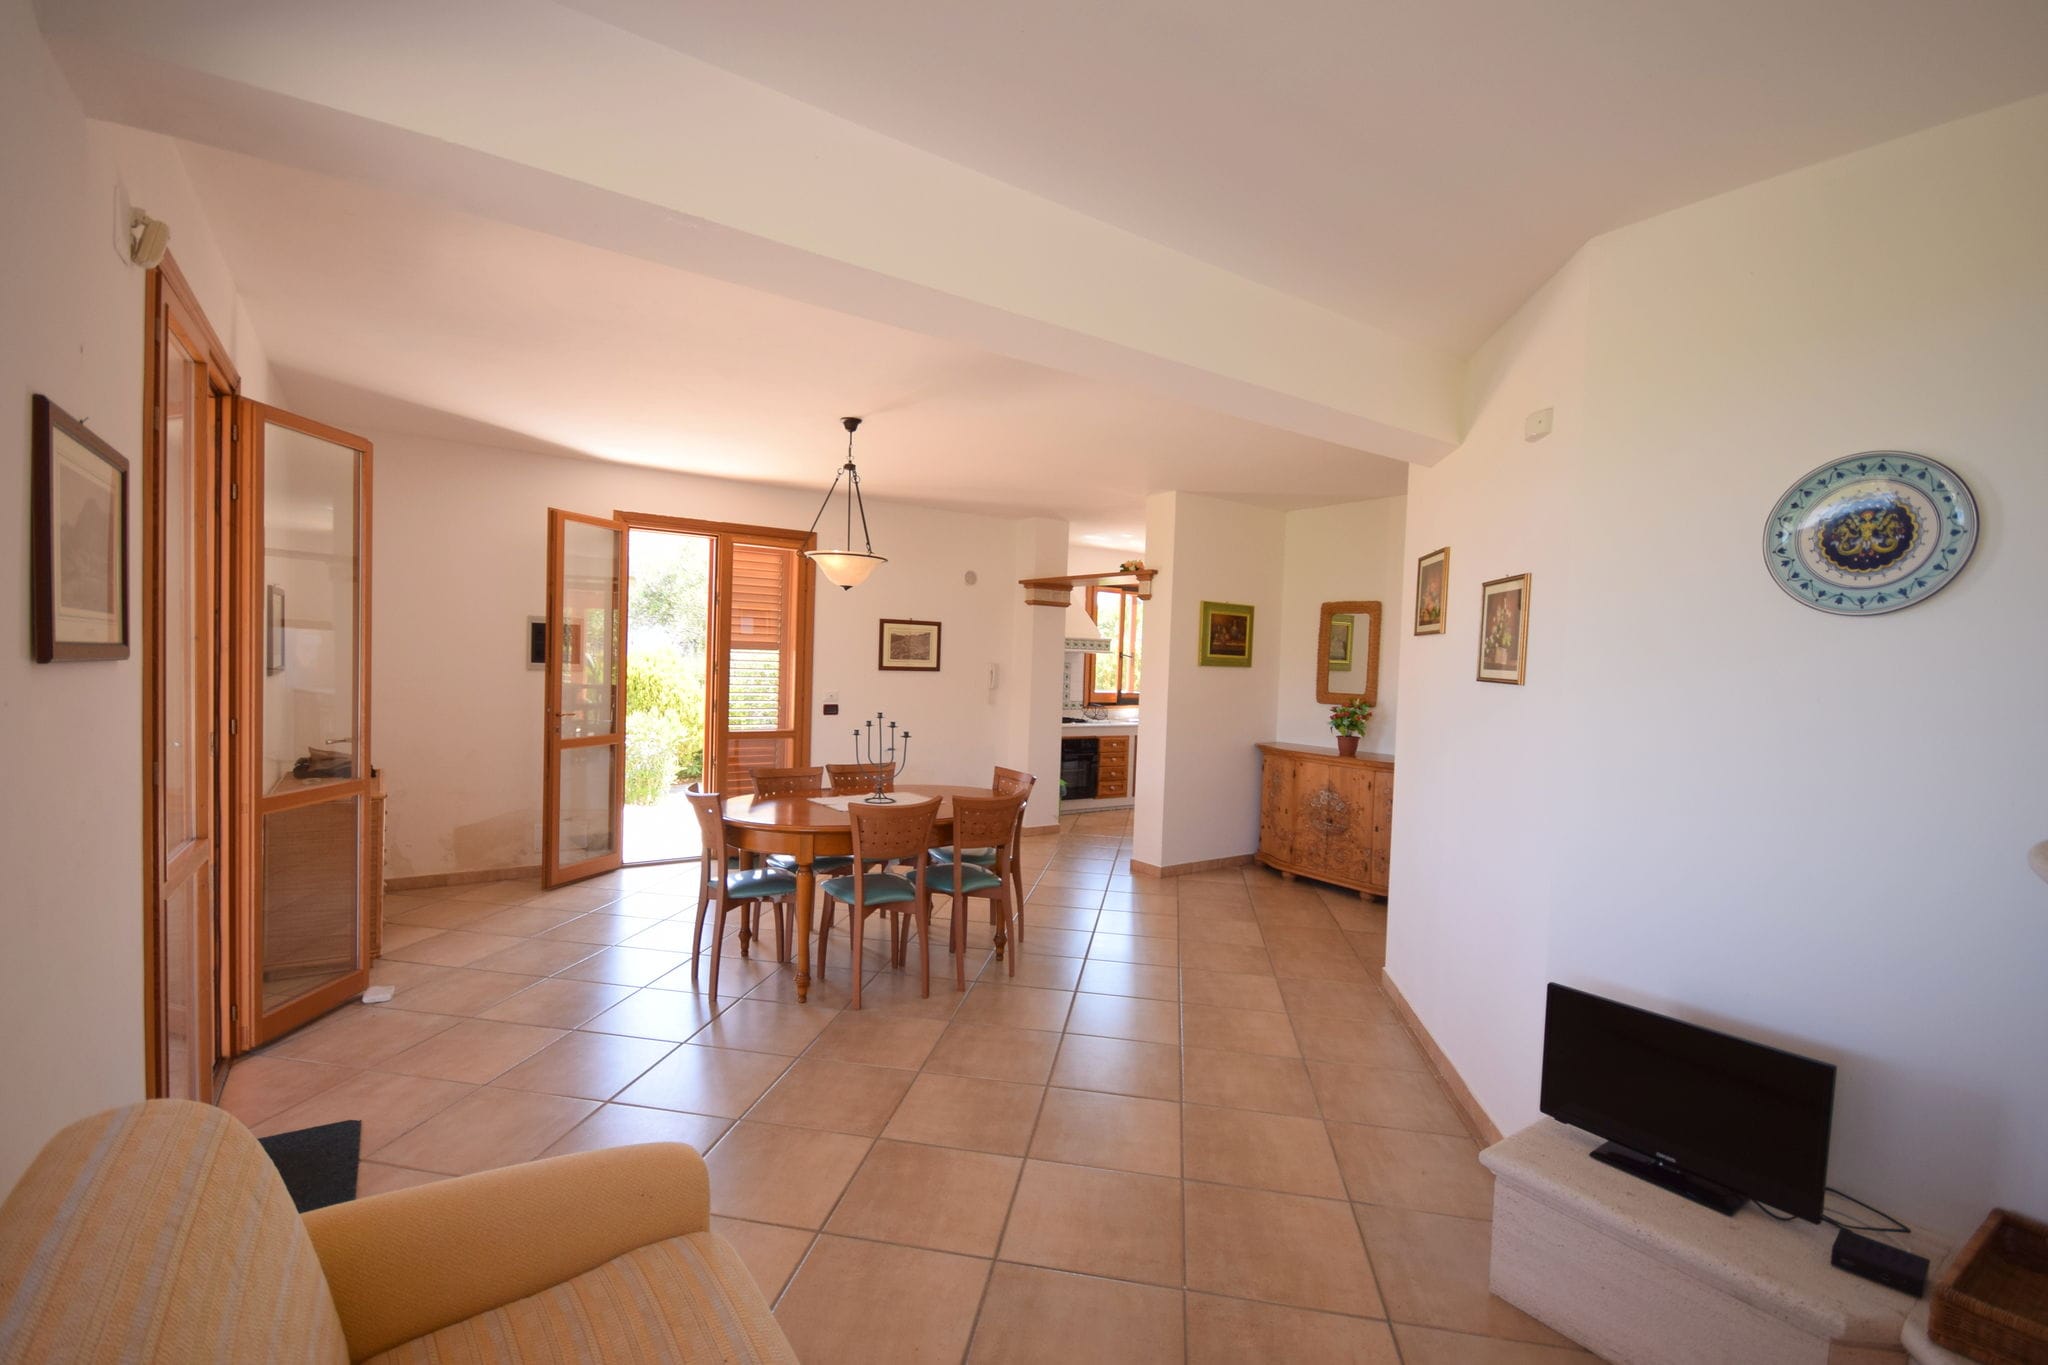 Detached villa located in a residential area a few kilometers from the sea.